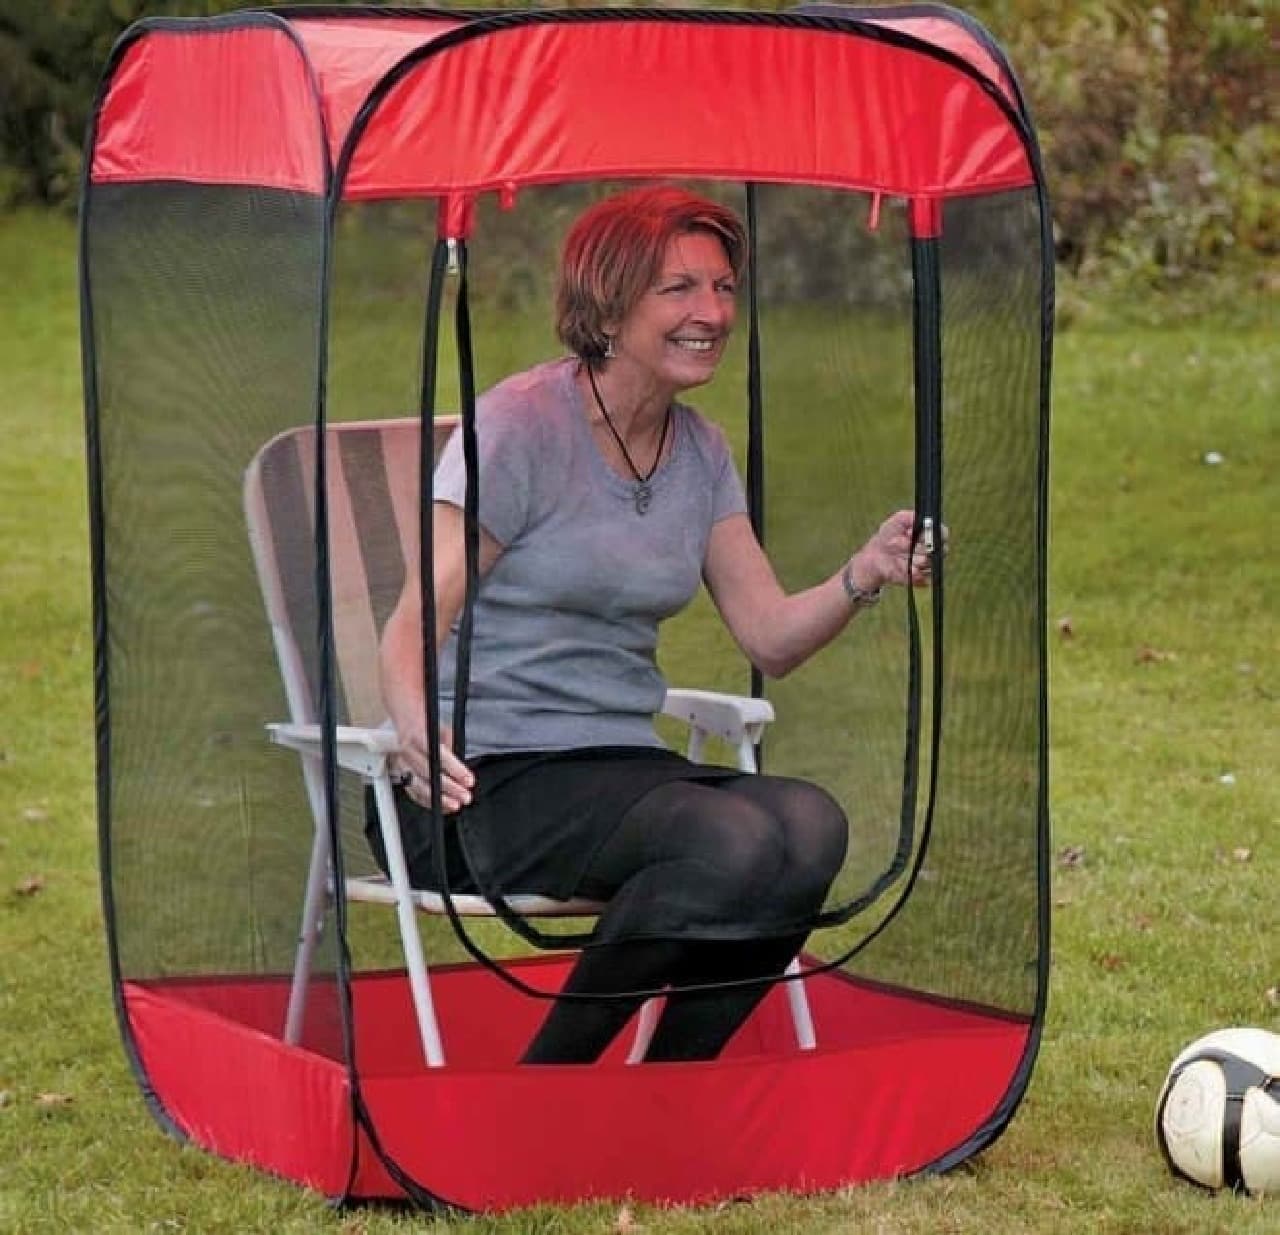 Mini tent "Pop-Up Screen Chair Tent" that protects against mosquitoes and insects